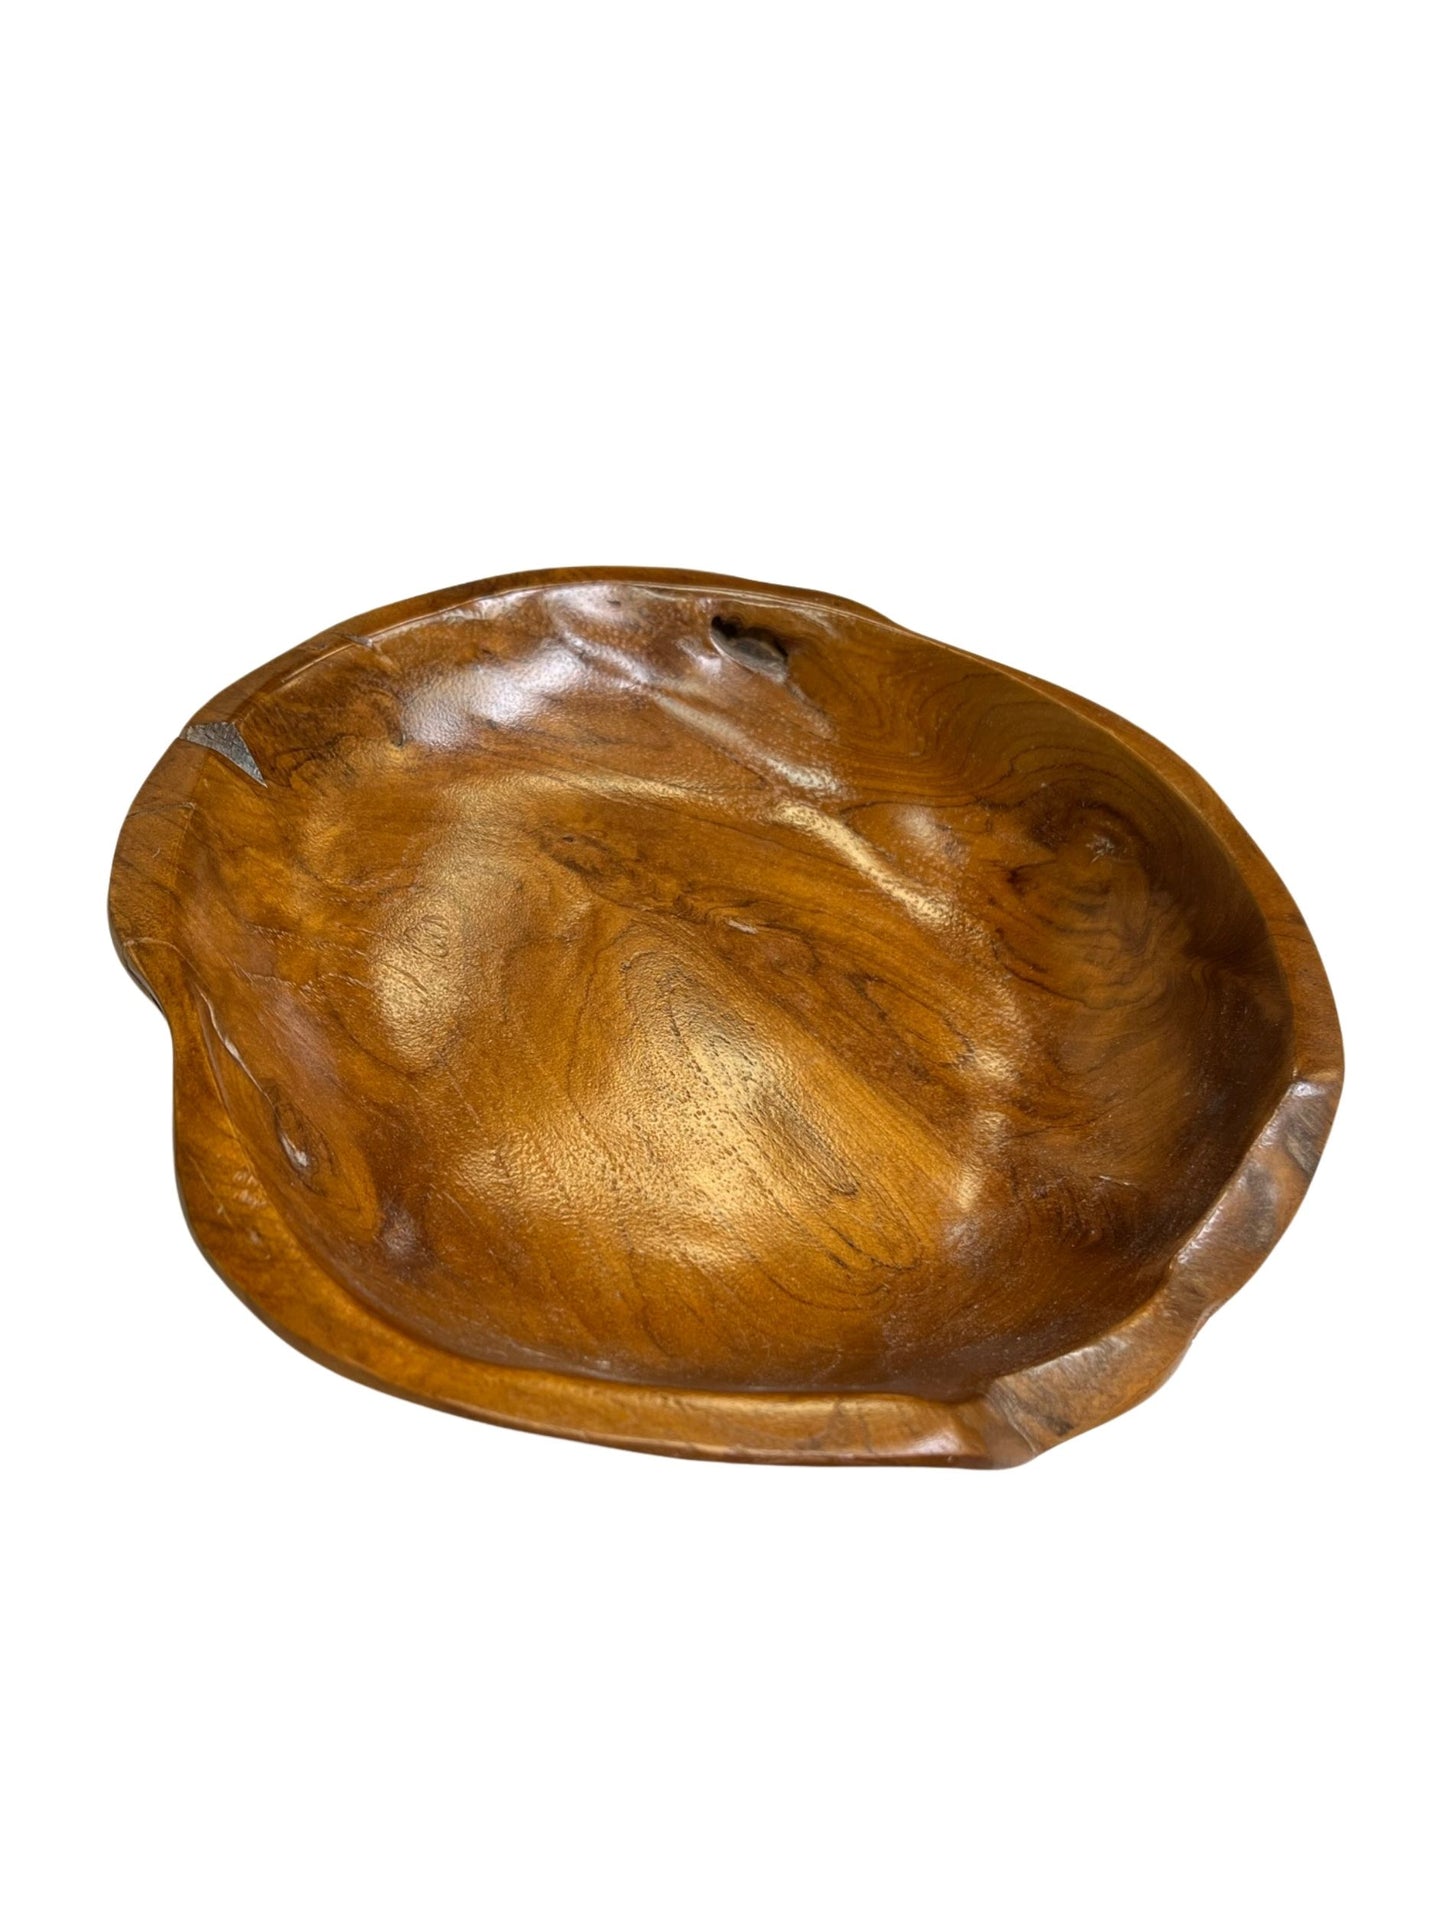 Eclectic Home Accent Shallow Teak Bowl 2946 Natural  Decor Furniture